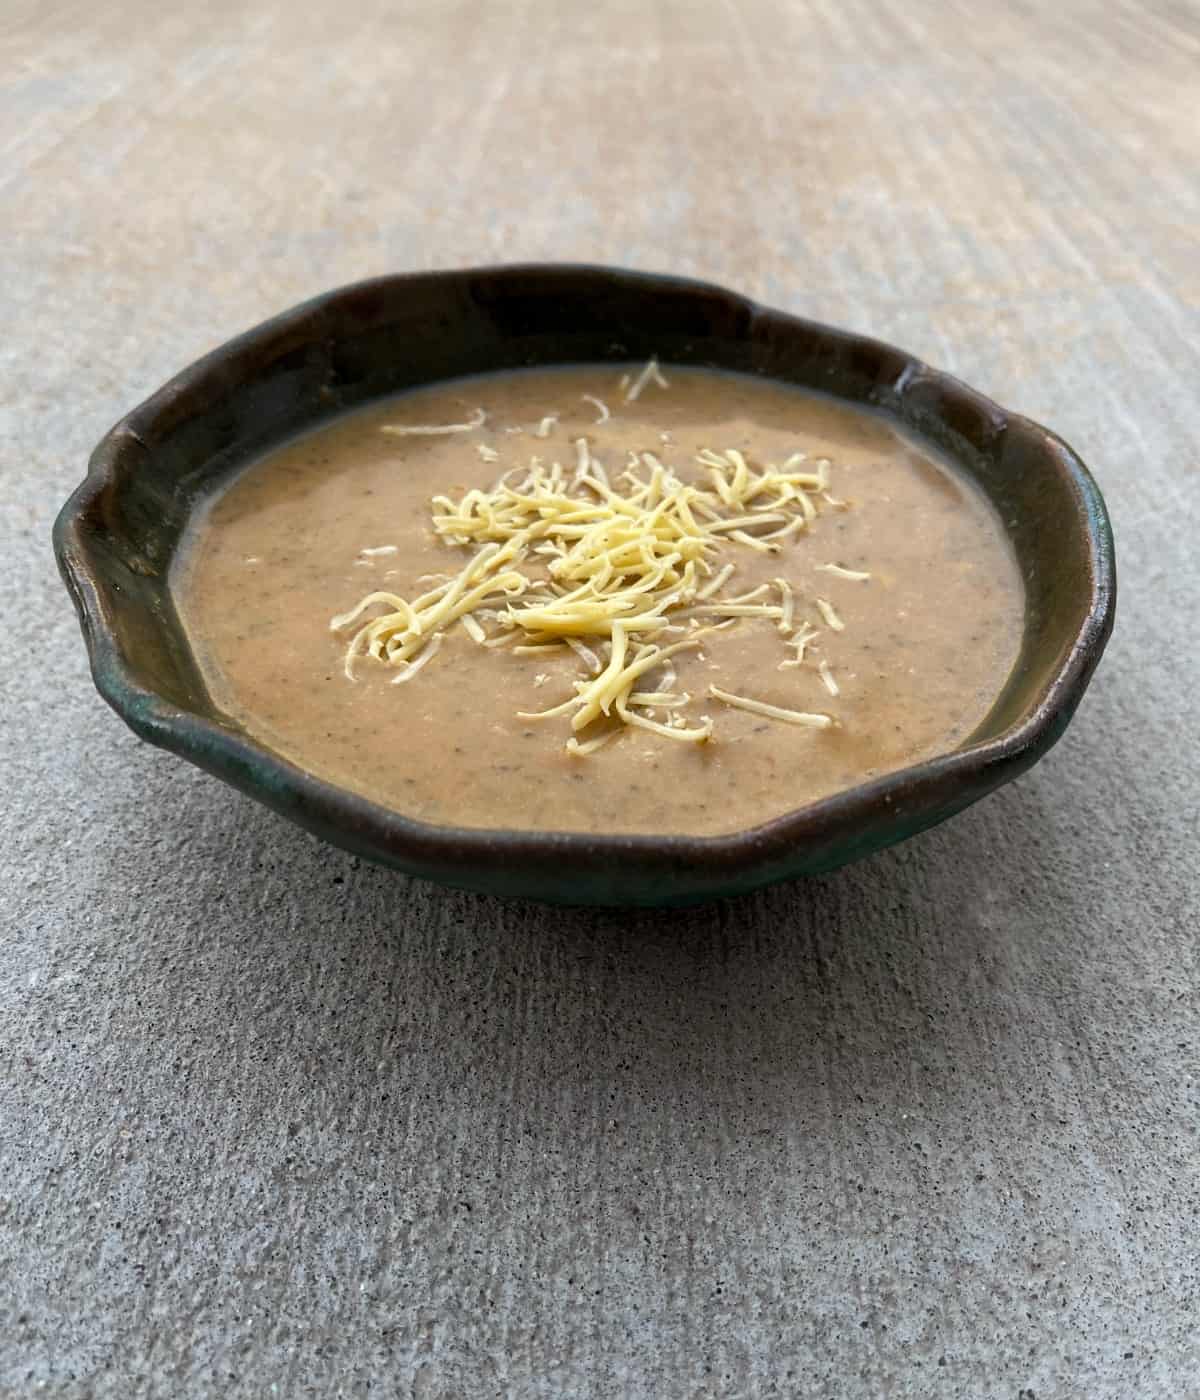 Broccoli cheese soup on pottery bowl topped with shredded cheddar.